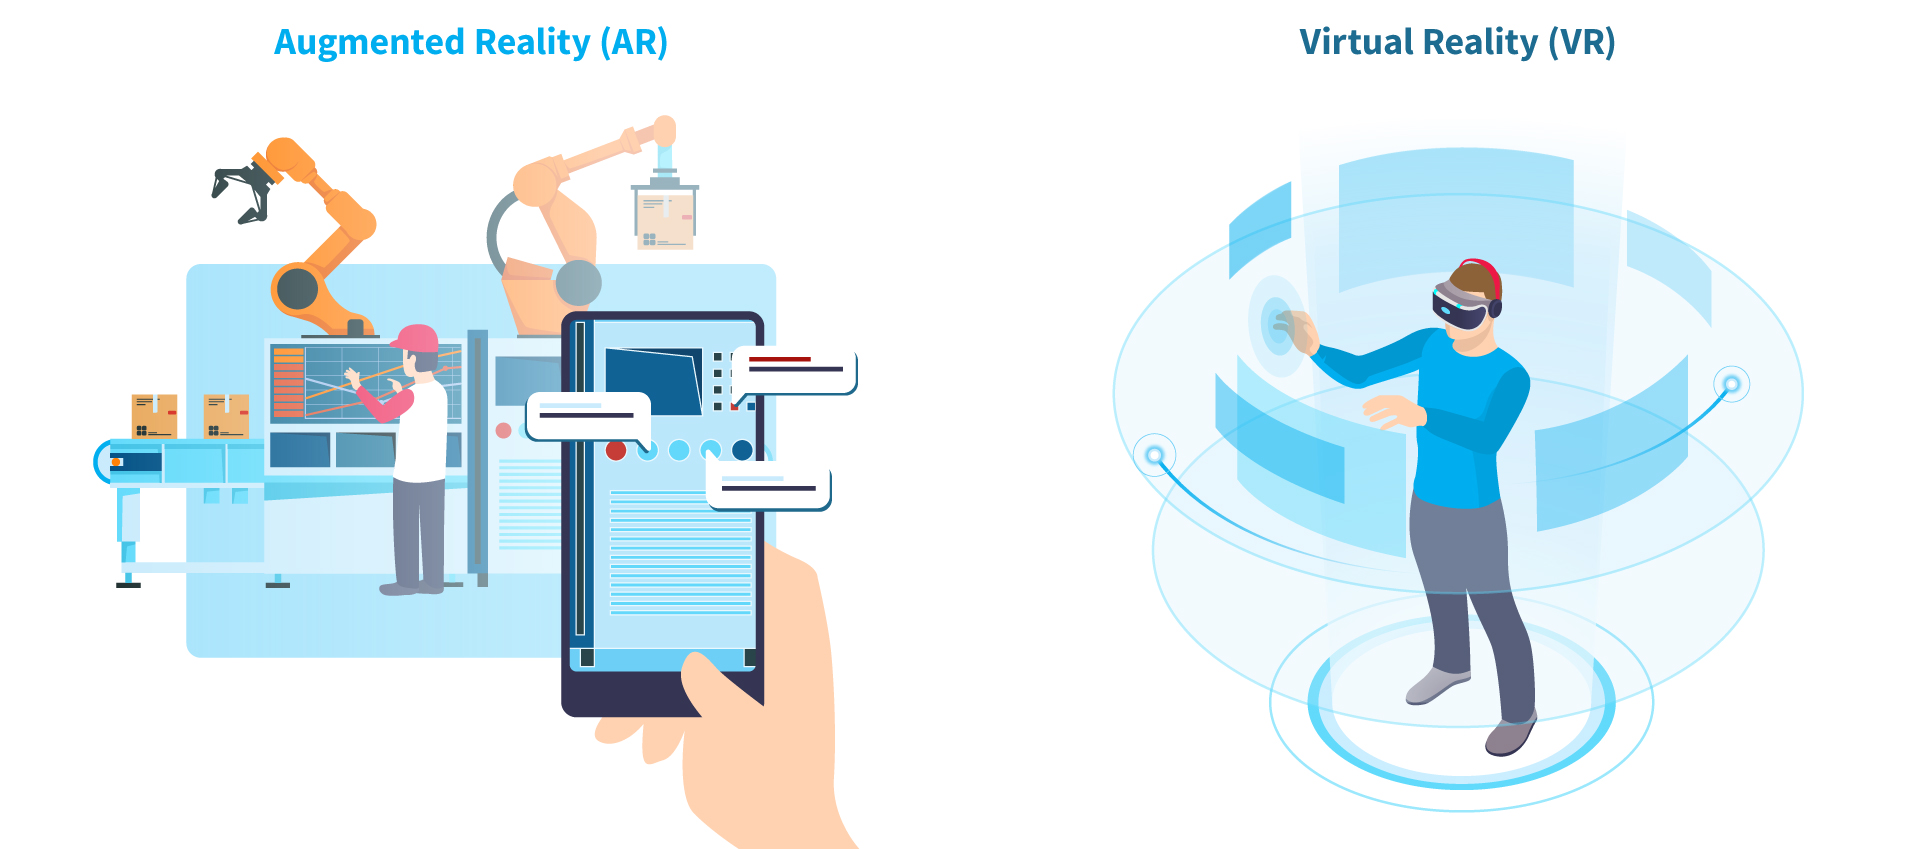 Uses of Virtual and Augmented Reality in Business by Industry – NIX United